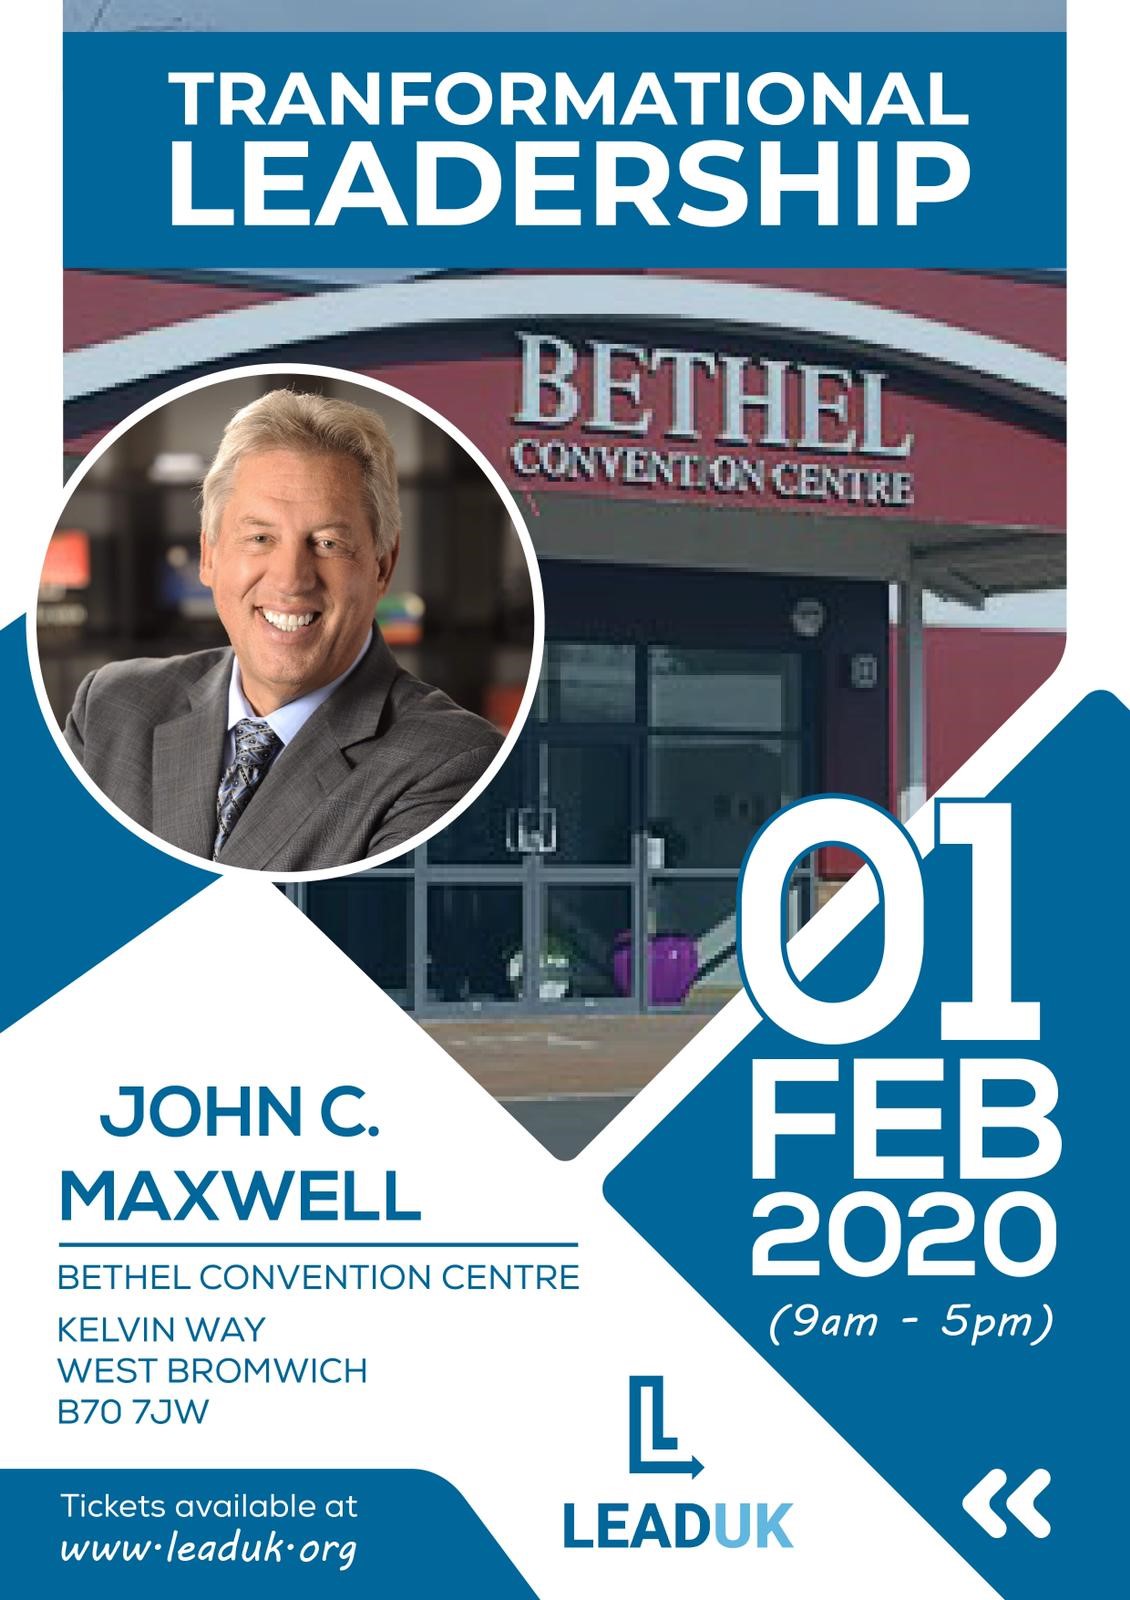 John C. Maxwell Conference Love Black Country